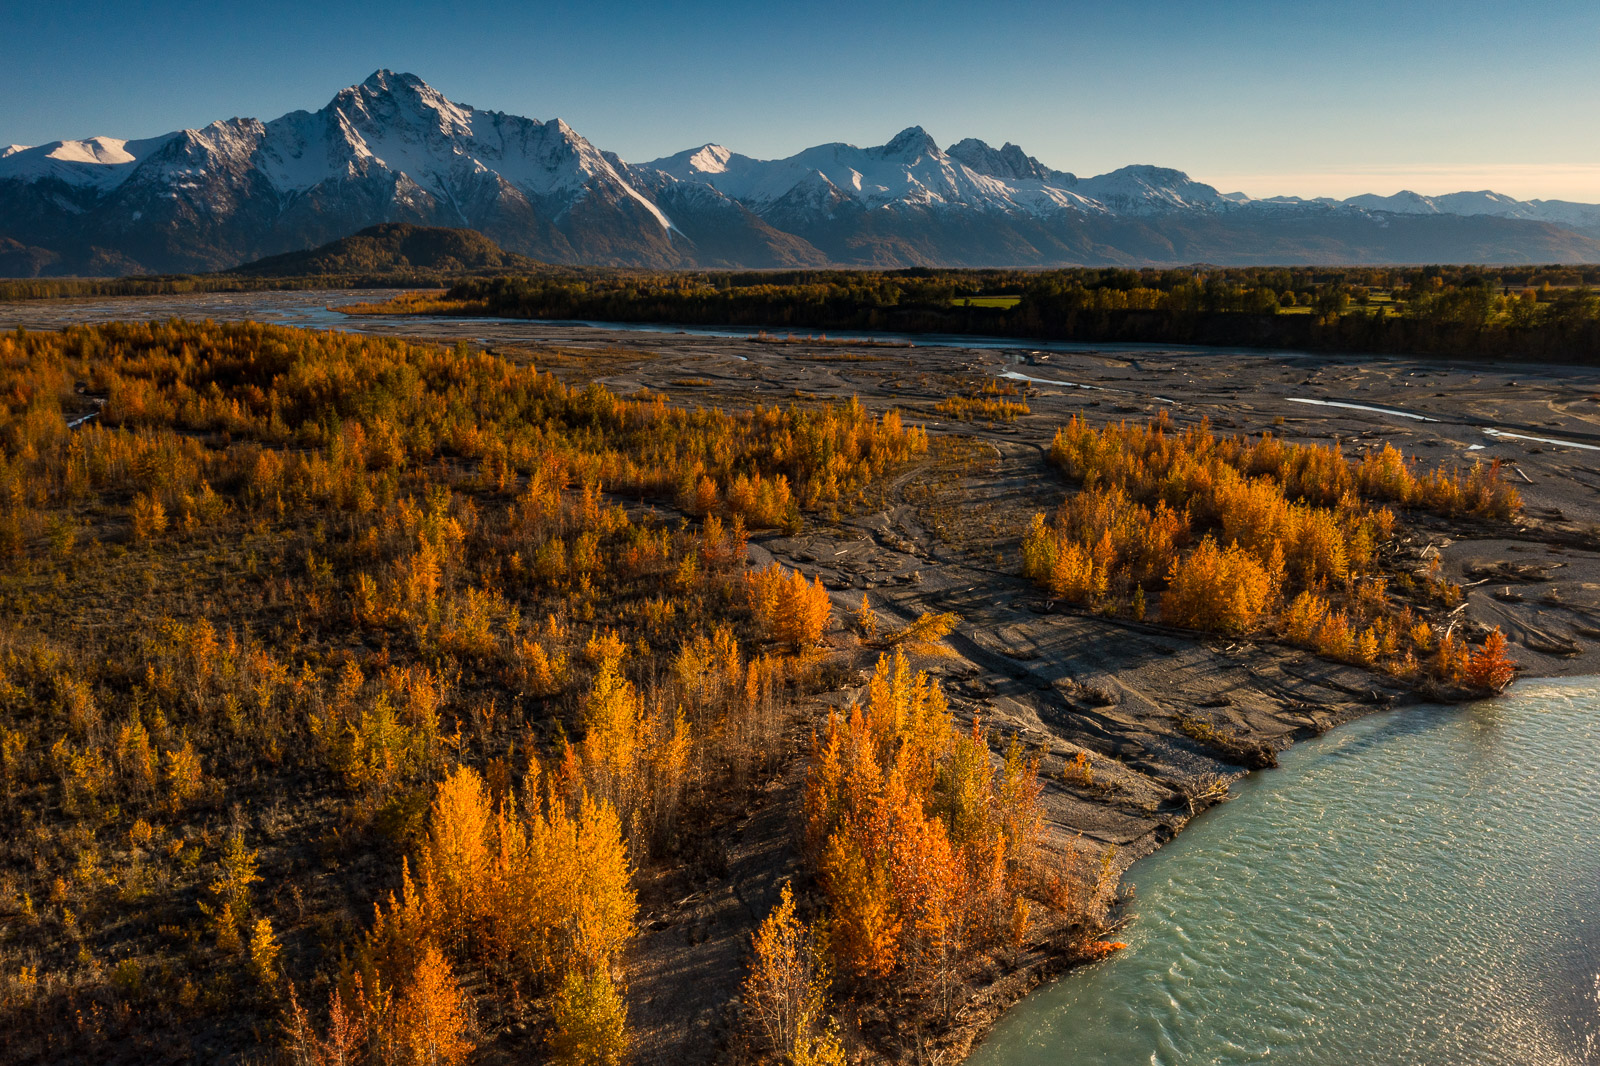 Pioneer Peak and Twin Peaks fill out the horizon as fall colors line the banks of the Matanuska River.